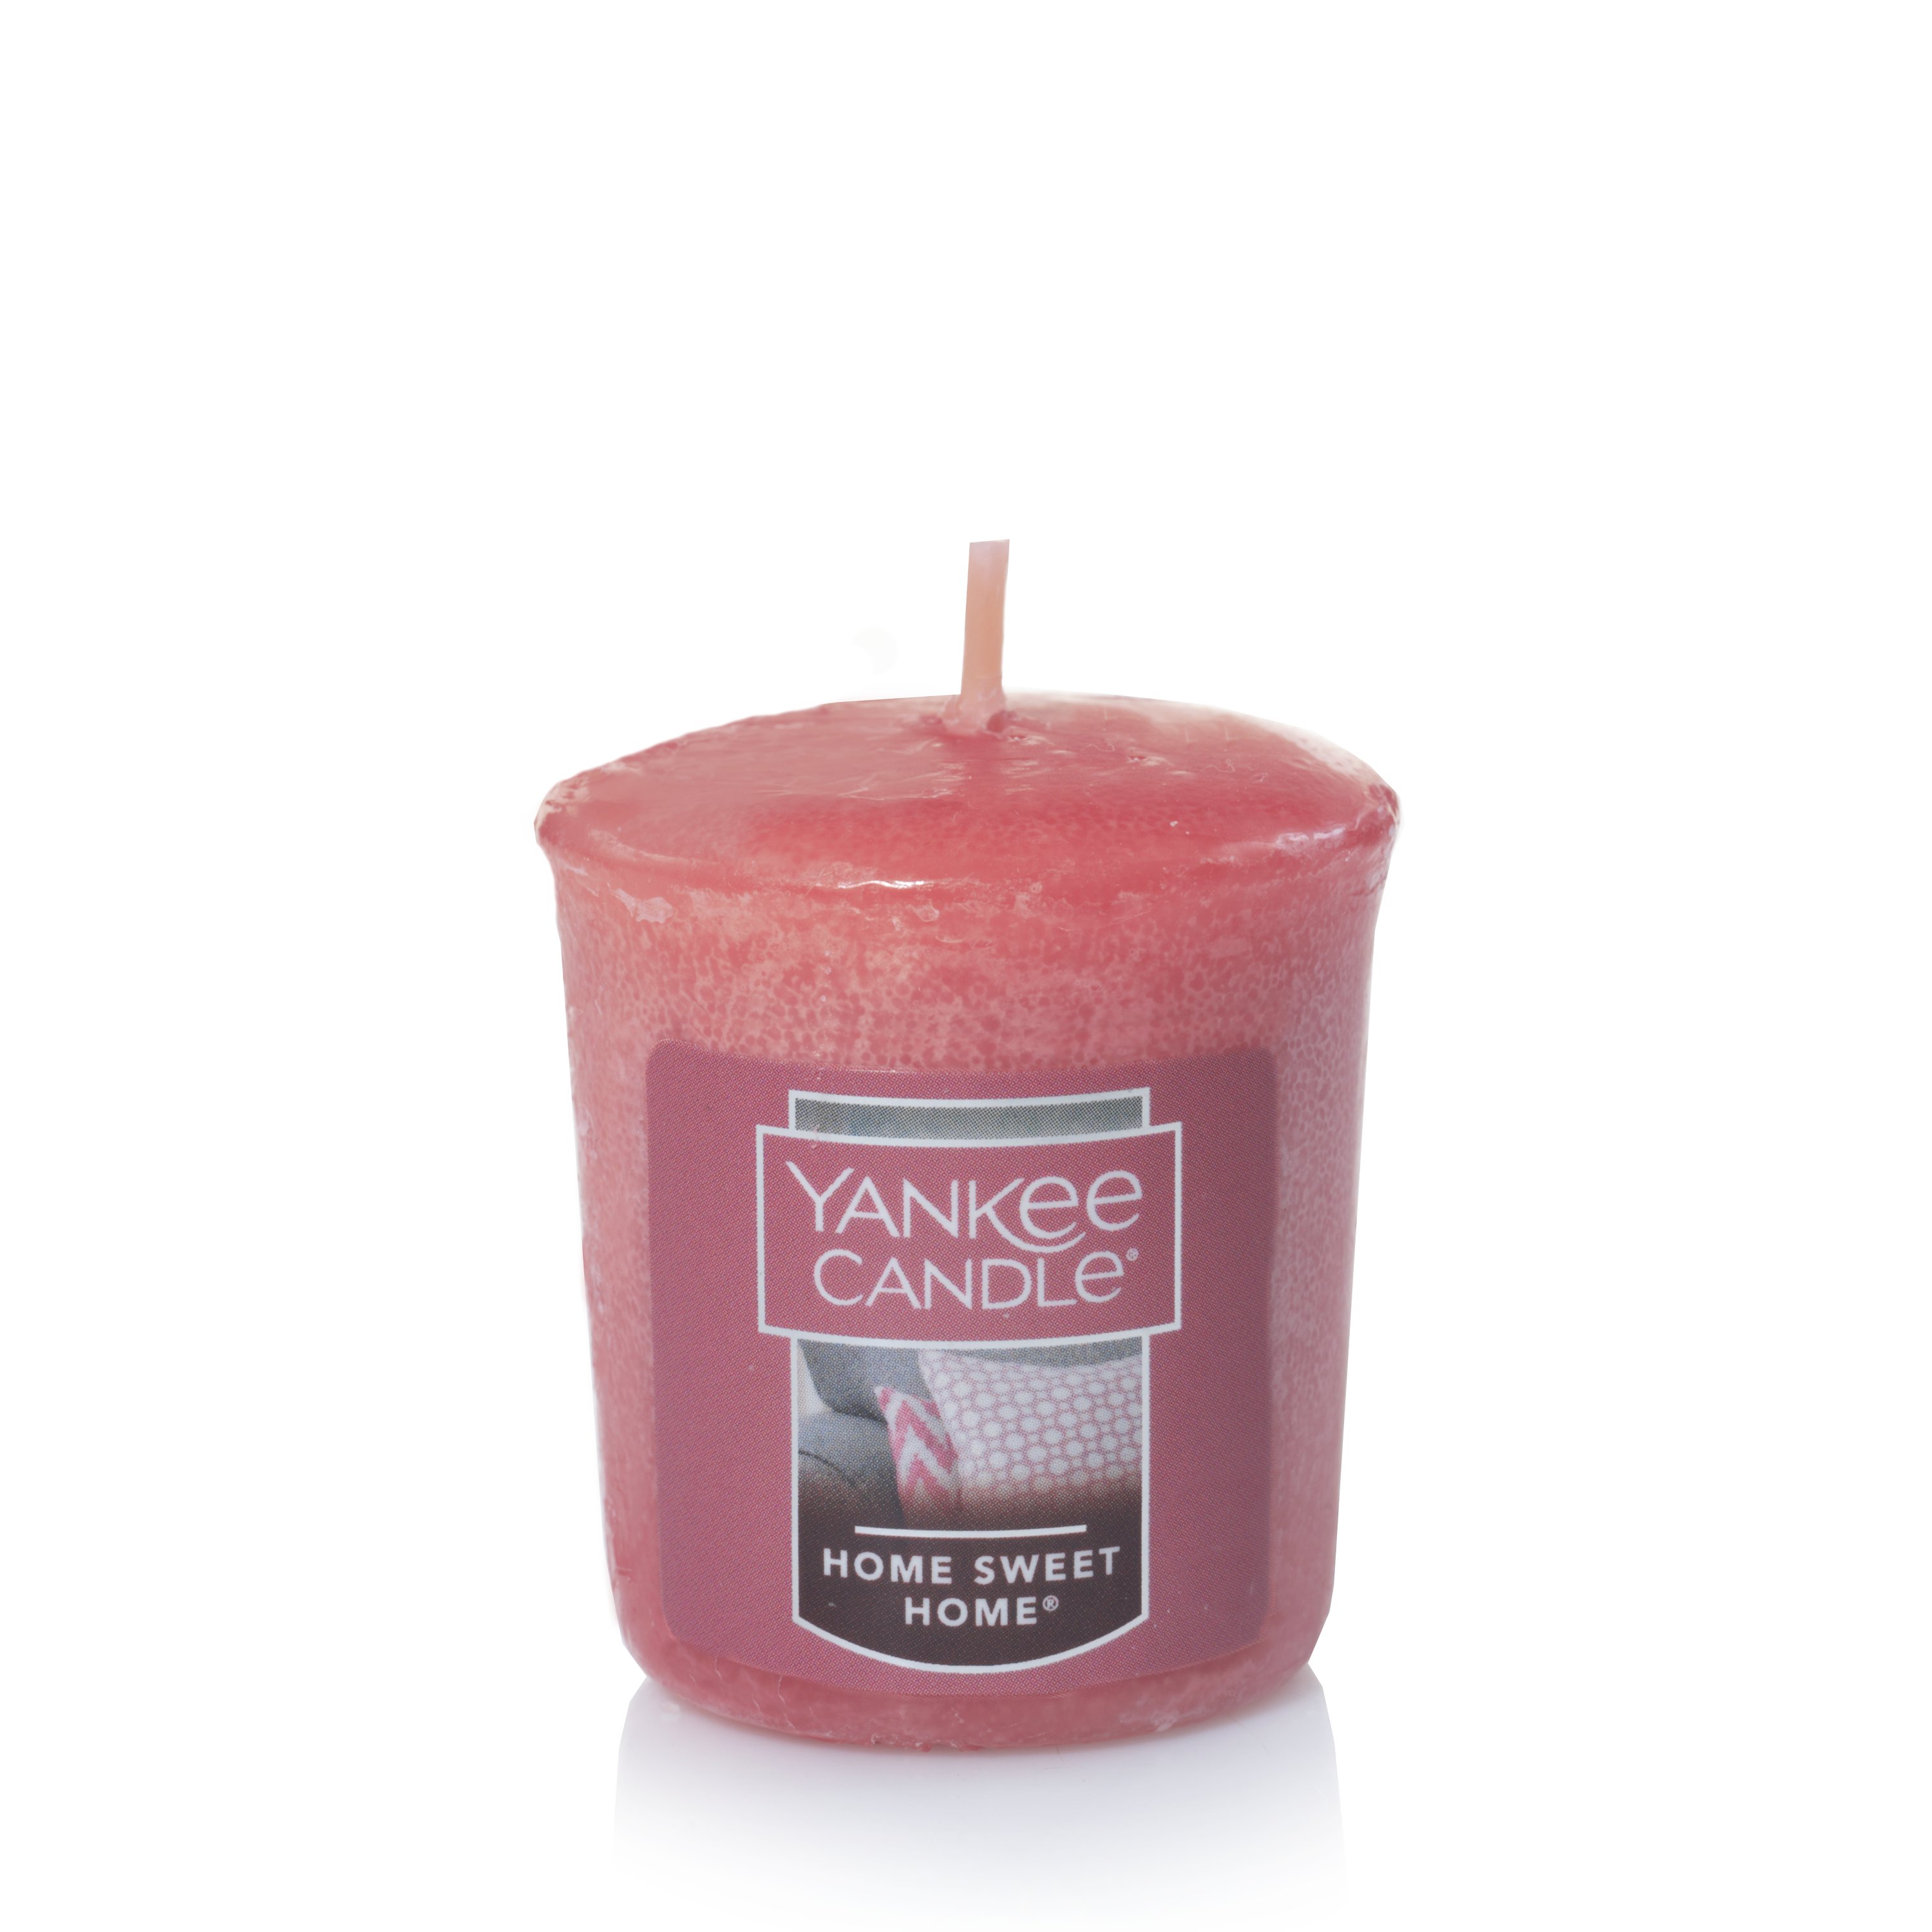 Yankee Candle Votive Scented Candles